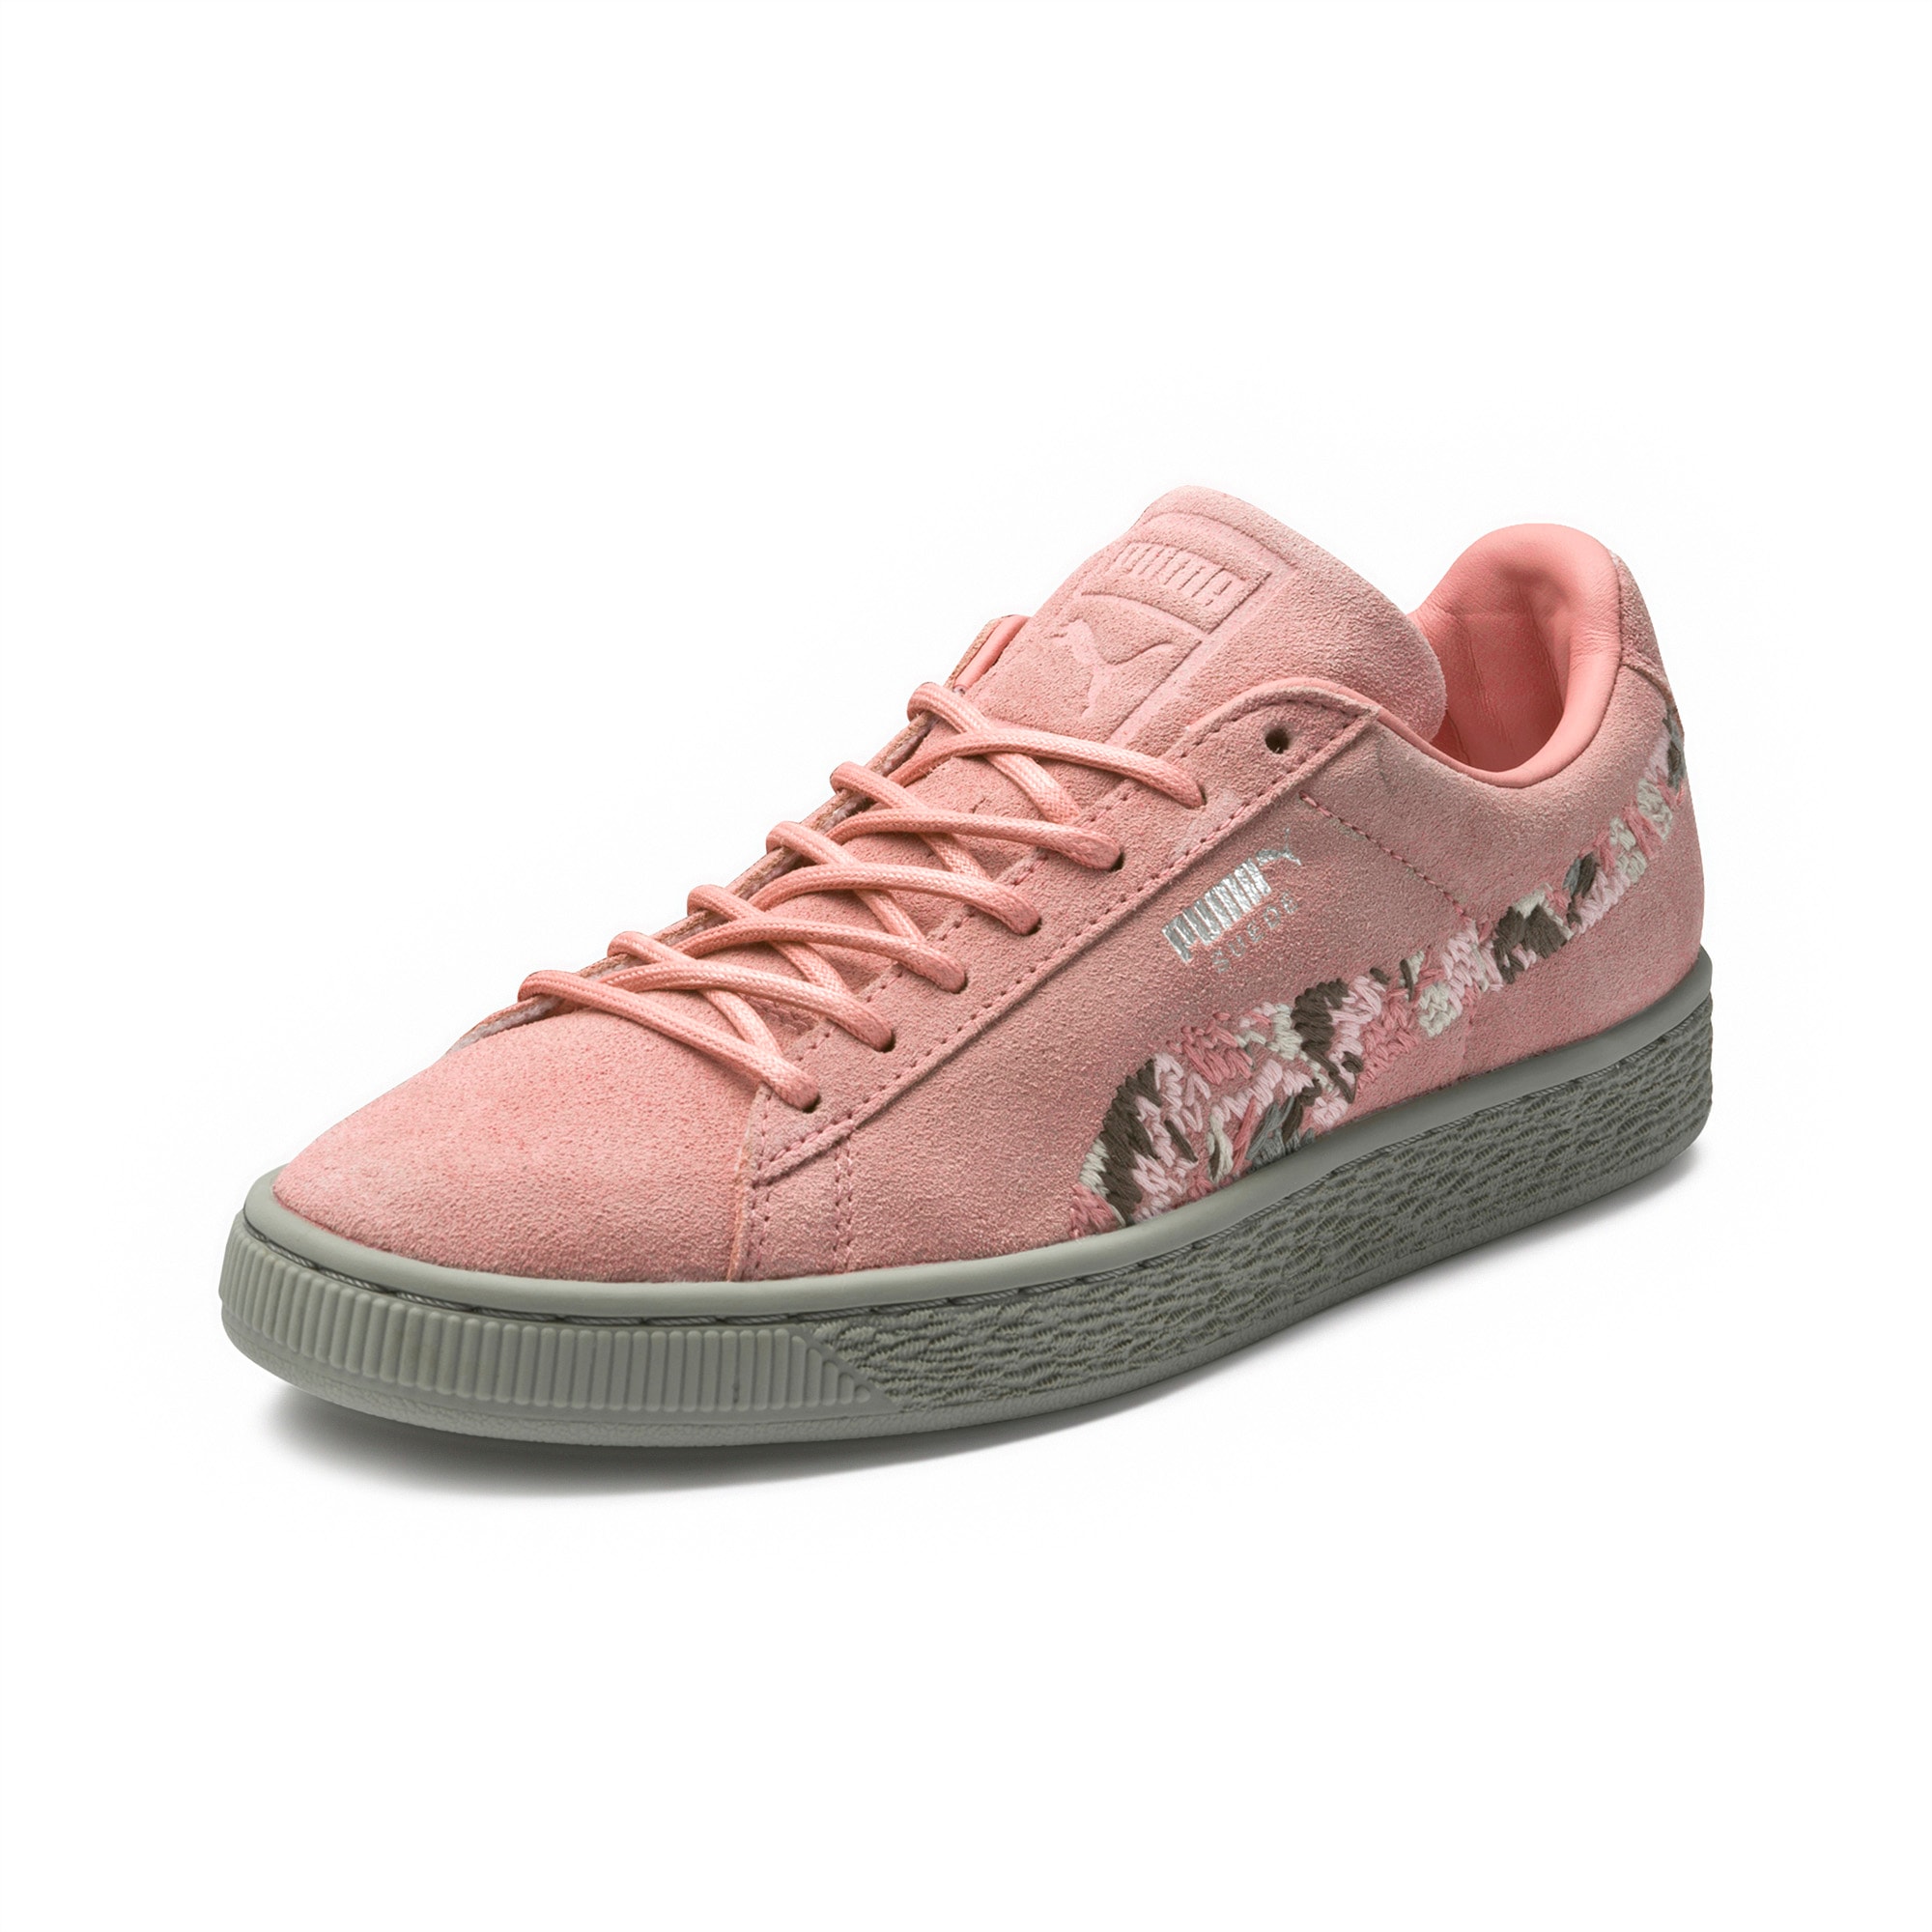 Suede Sunfade Stitch Women's Sneakers 